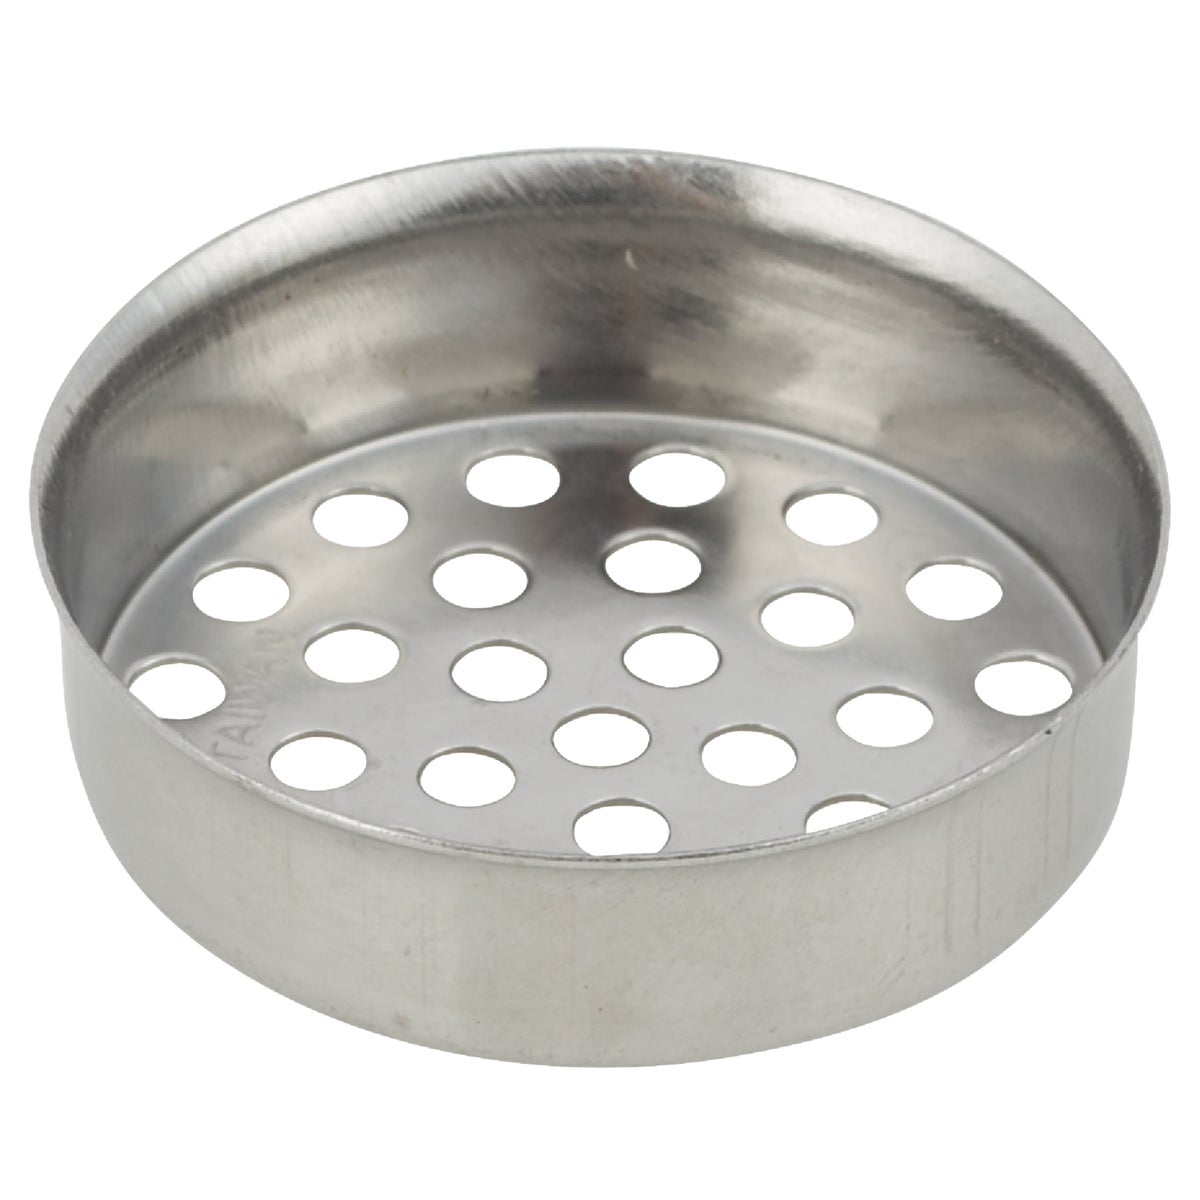 Item 415615, Fits all regular laundry tubs and many bathtubs. Chrome-plated.